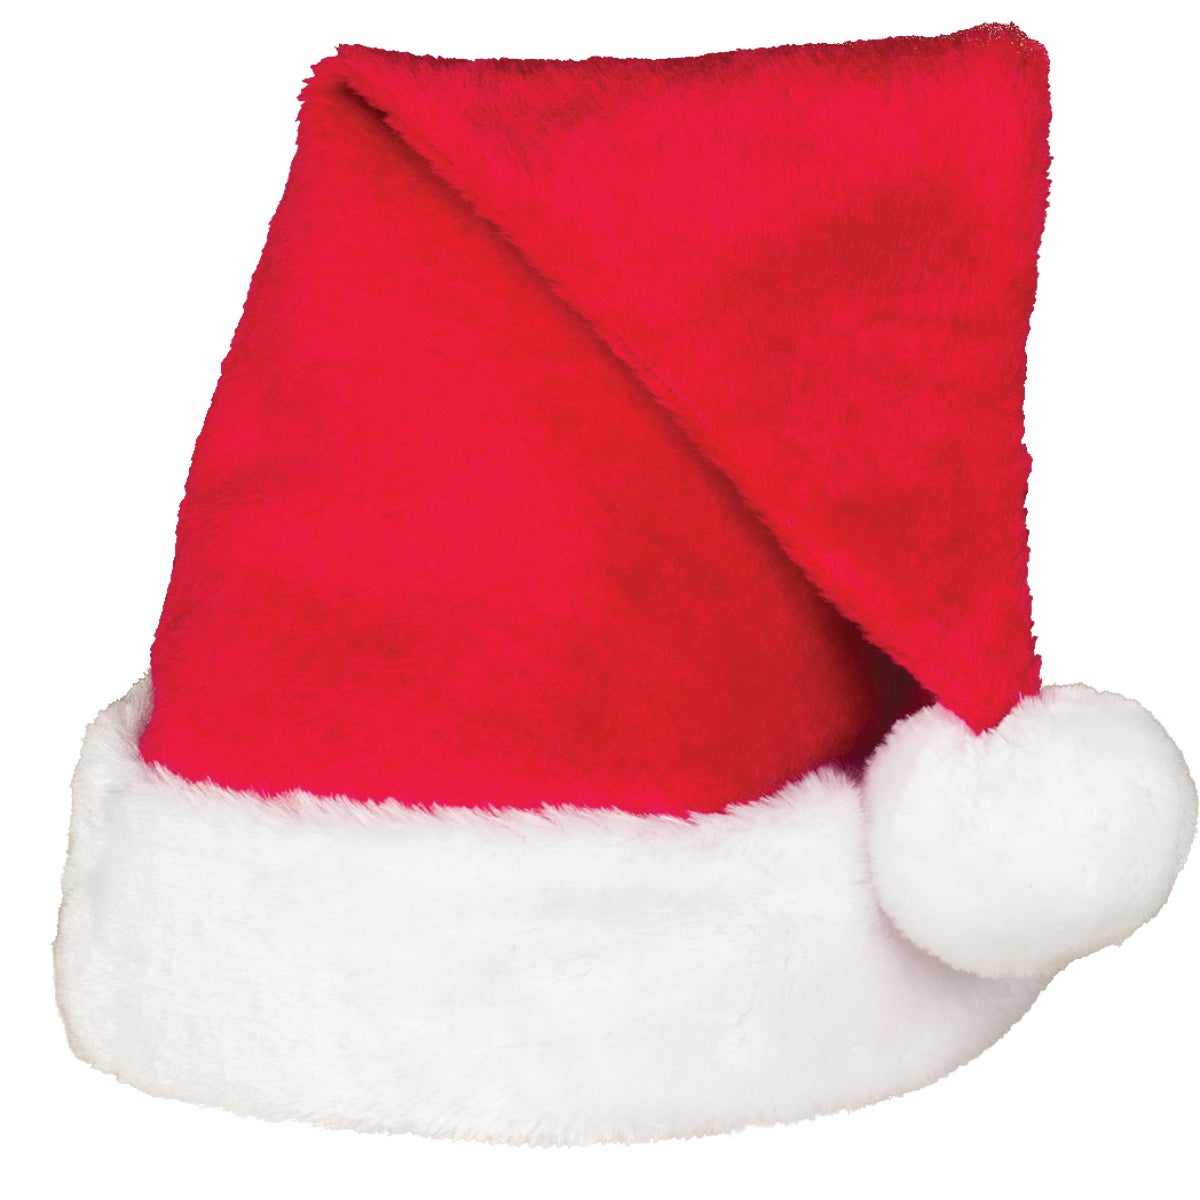 Item 900161, Red plush Santa hat. Features a white cuff and pom.